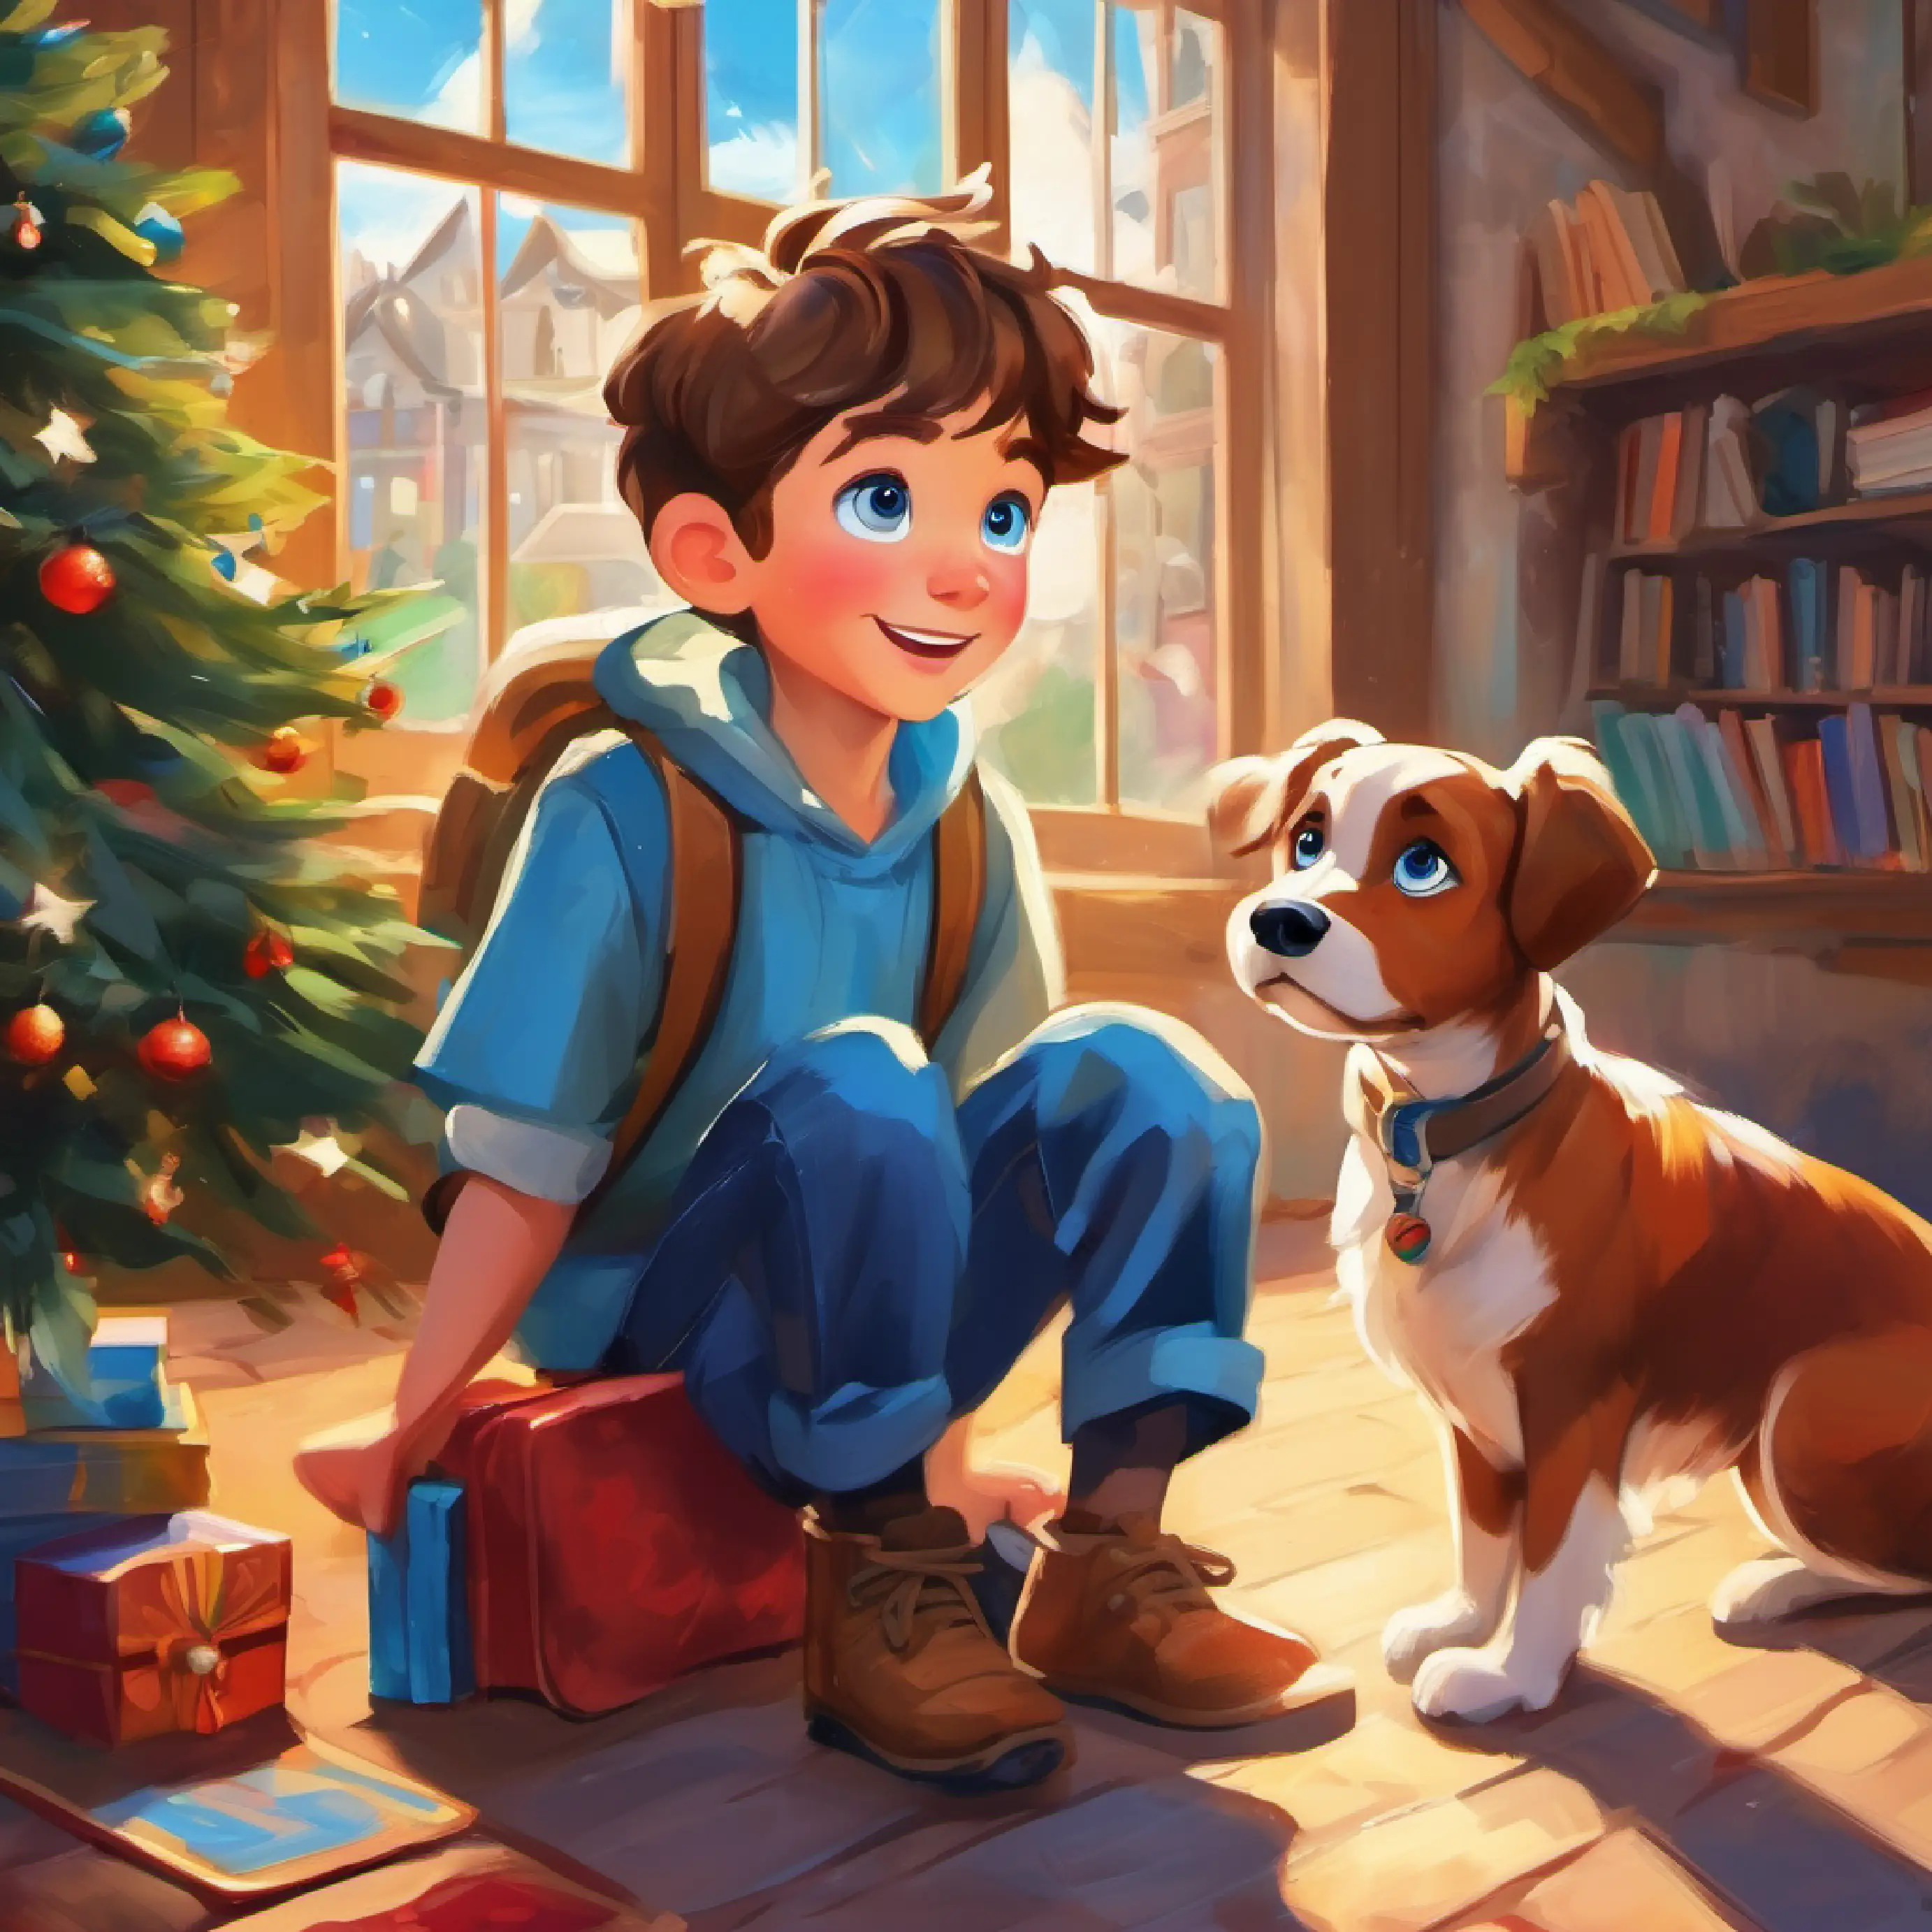 Young boy with bright blue eyes, spirited and imaginative is distracted at school, eager to talk to Loyal dog with the secret ability to talk, cheerful and playful